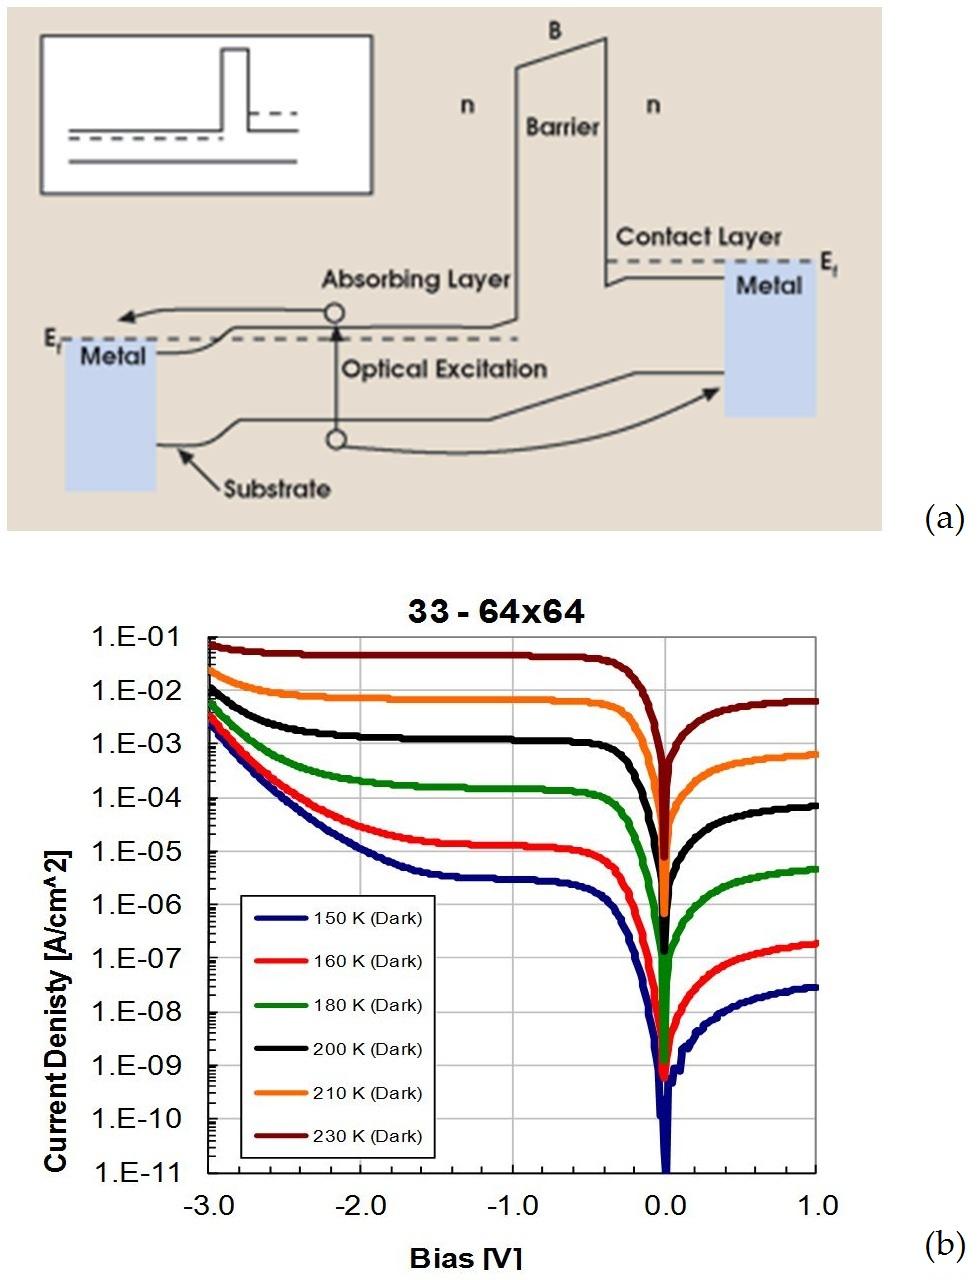 Advances in Infrared Detector Array Technology http://dx.doi.org/10.5772/51665 177 Figure 22. a) nbn band diagram illustrating the carrier flow [http://www.photonics.com/article.aspx?aid=27744].